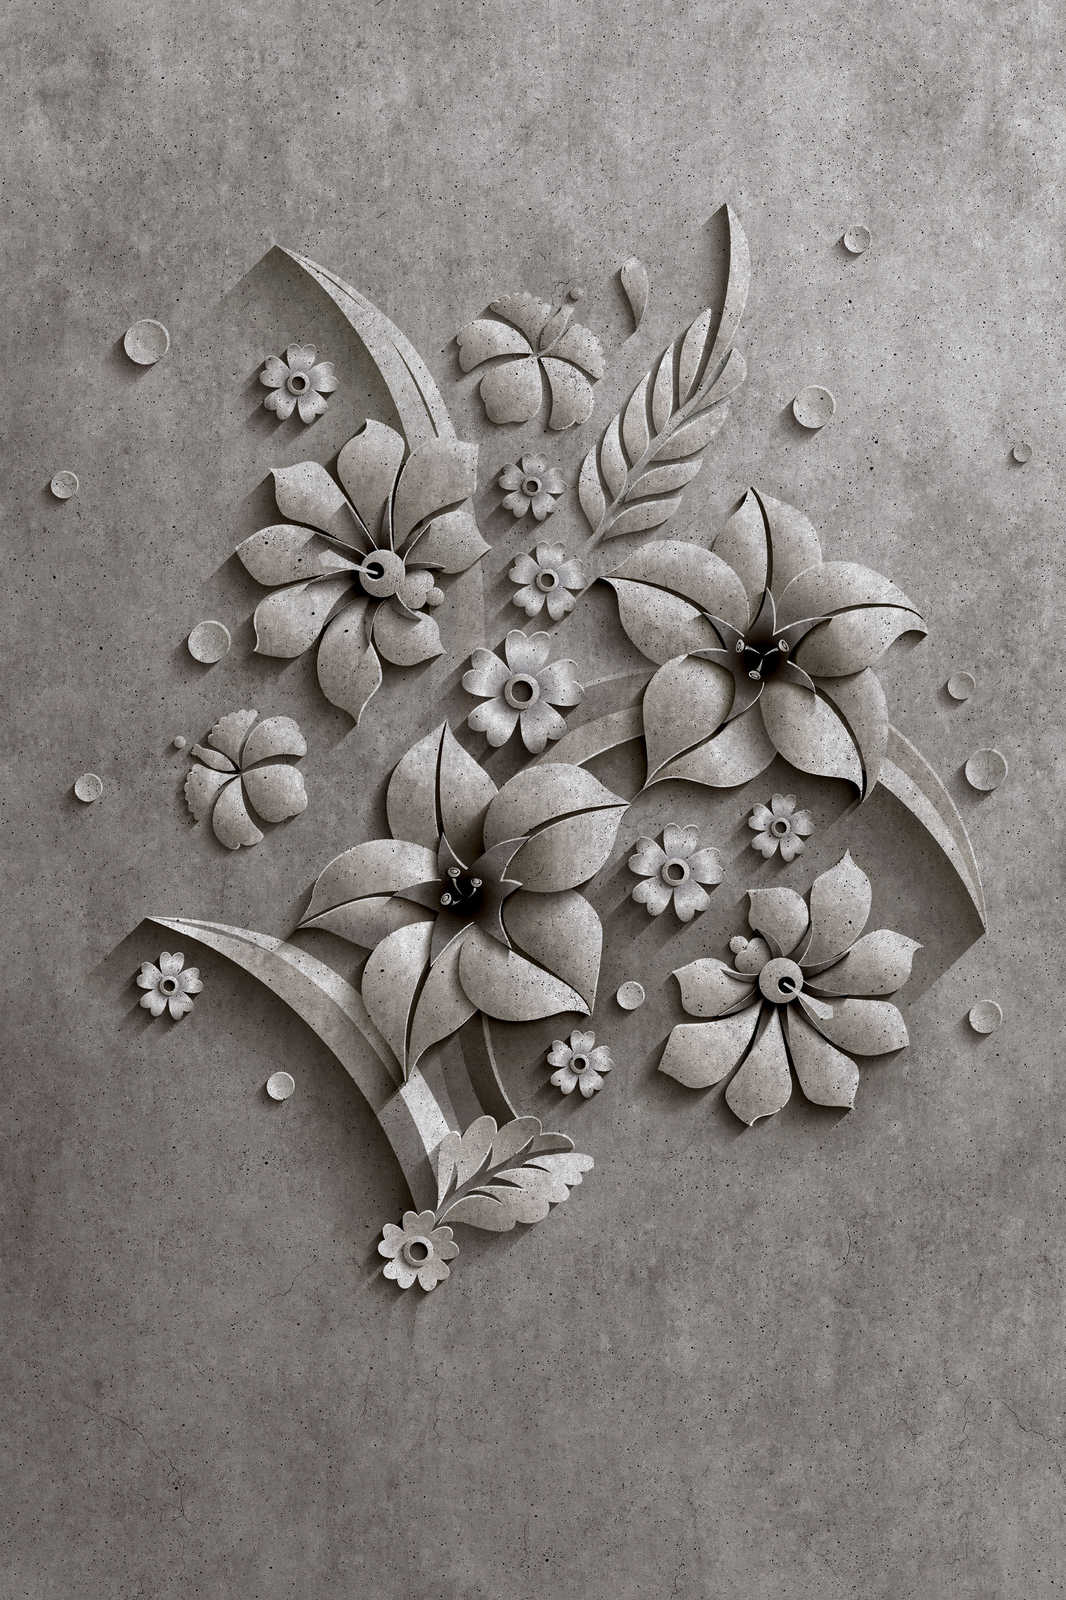             Relief 1 - Canvas painting in concrete structure of a flower relief - 1.20 m x 0.80 m
        